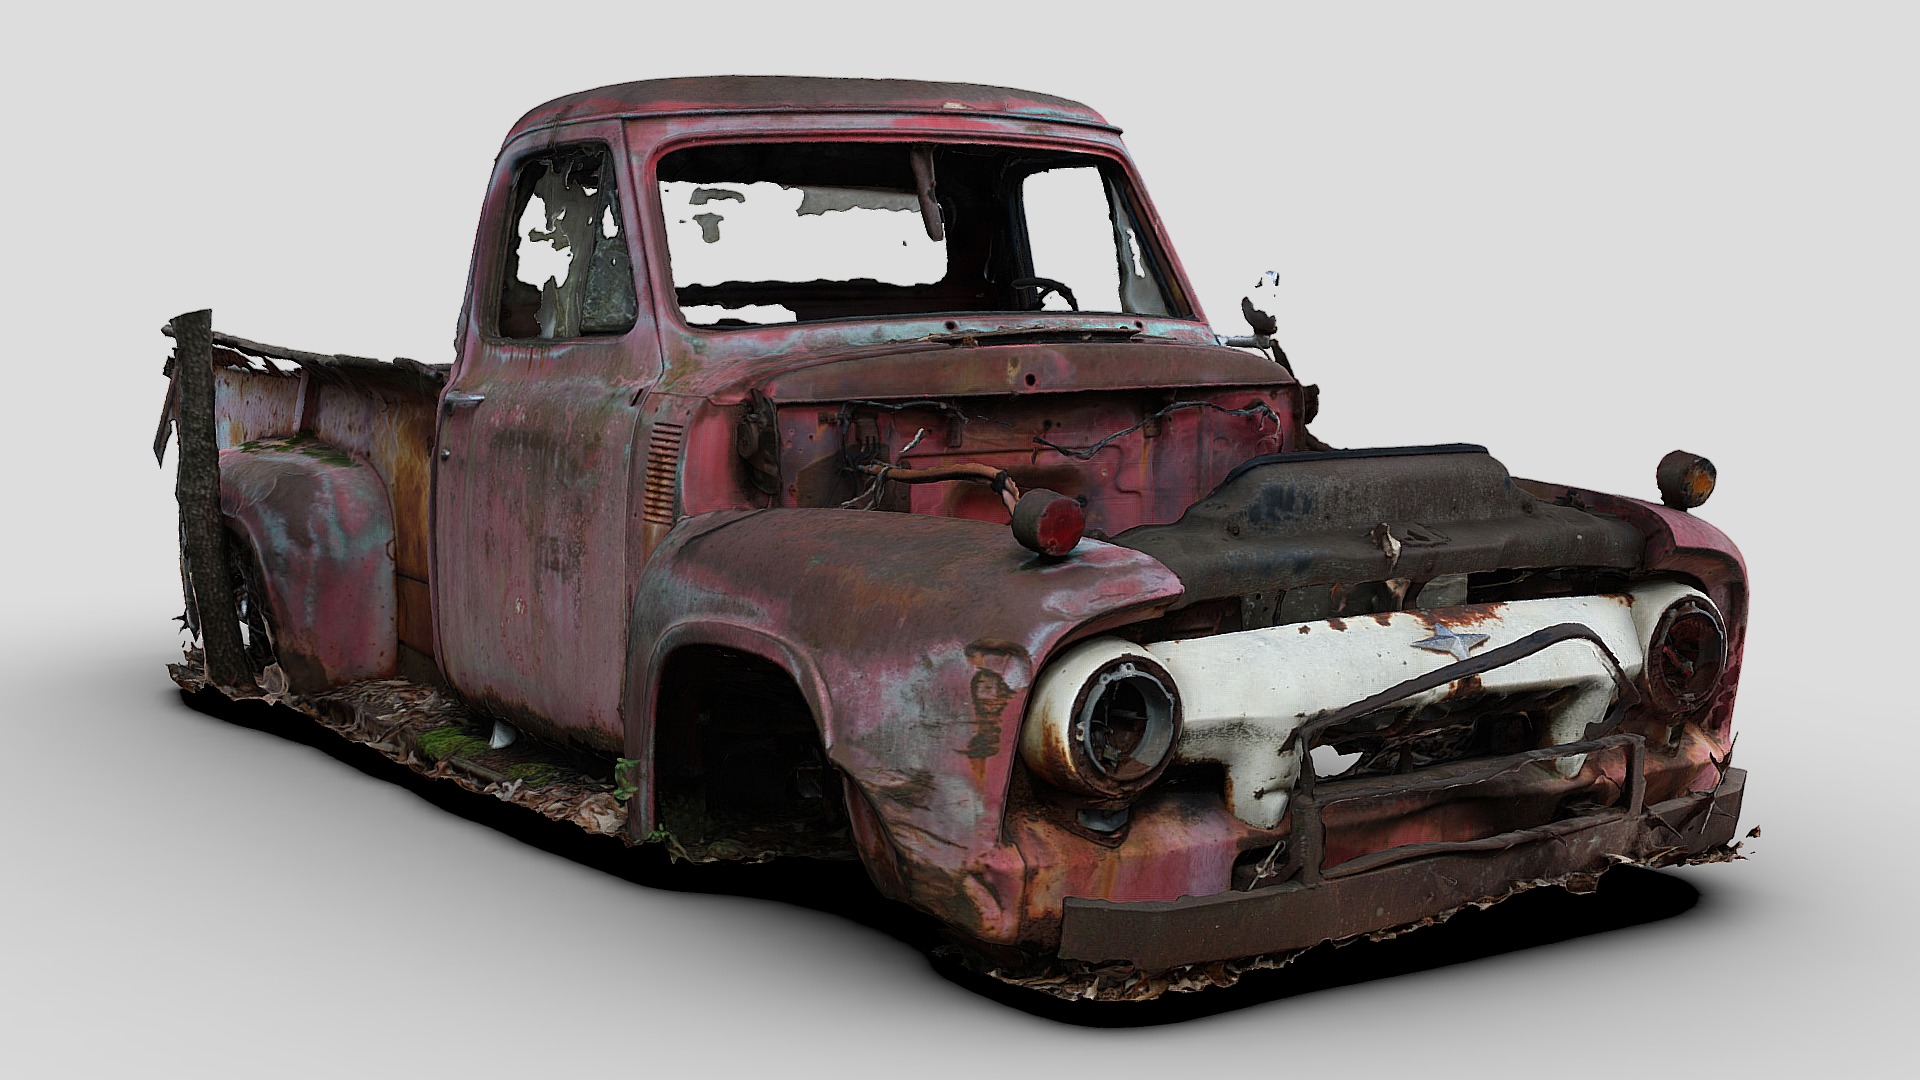 3D model Wrecked Fire Chief’s Truck (Raw Scan) - This is a 3D model of the Wrecked Fire Chief's Truck (Raw Scan). The 3D model is about a red car with a dent in the front.